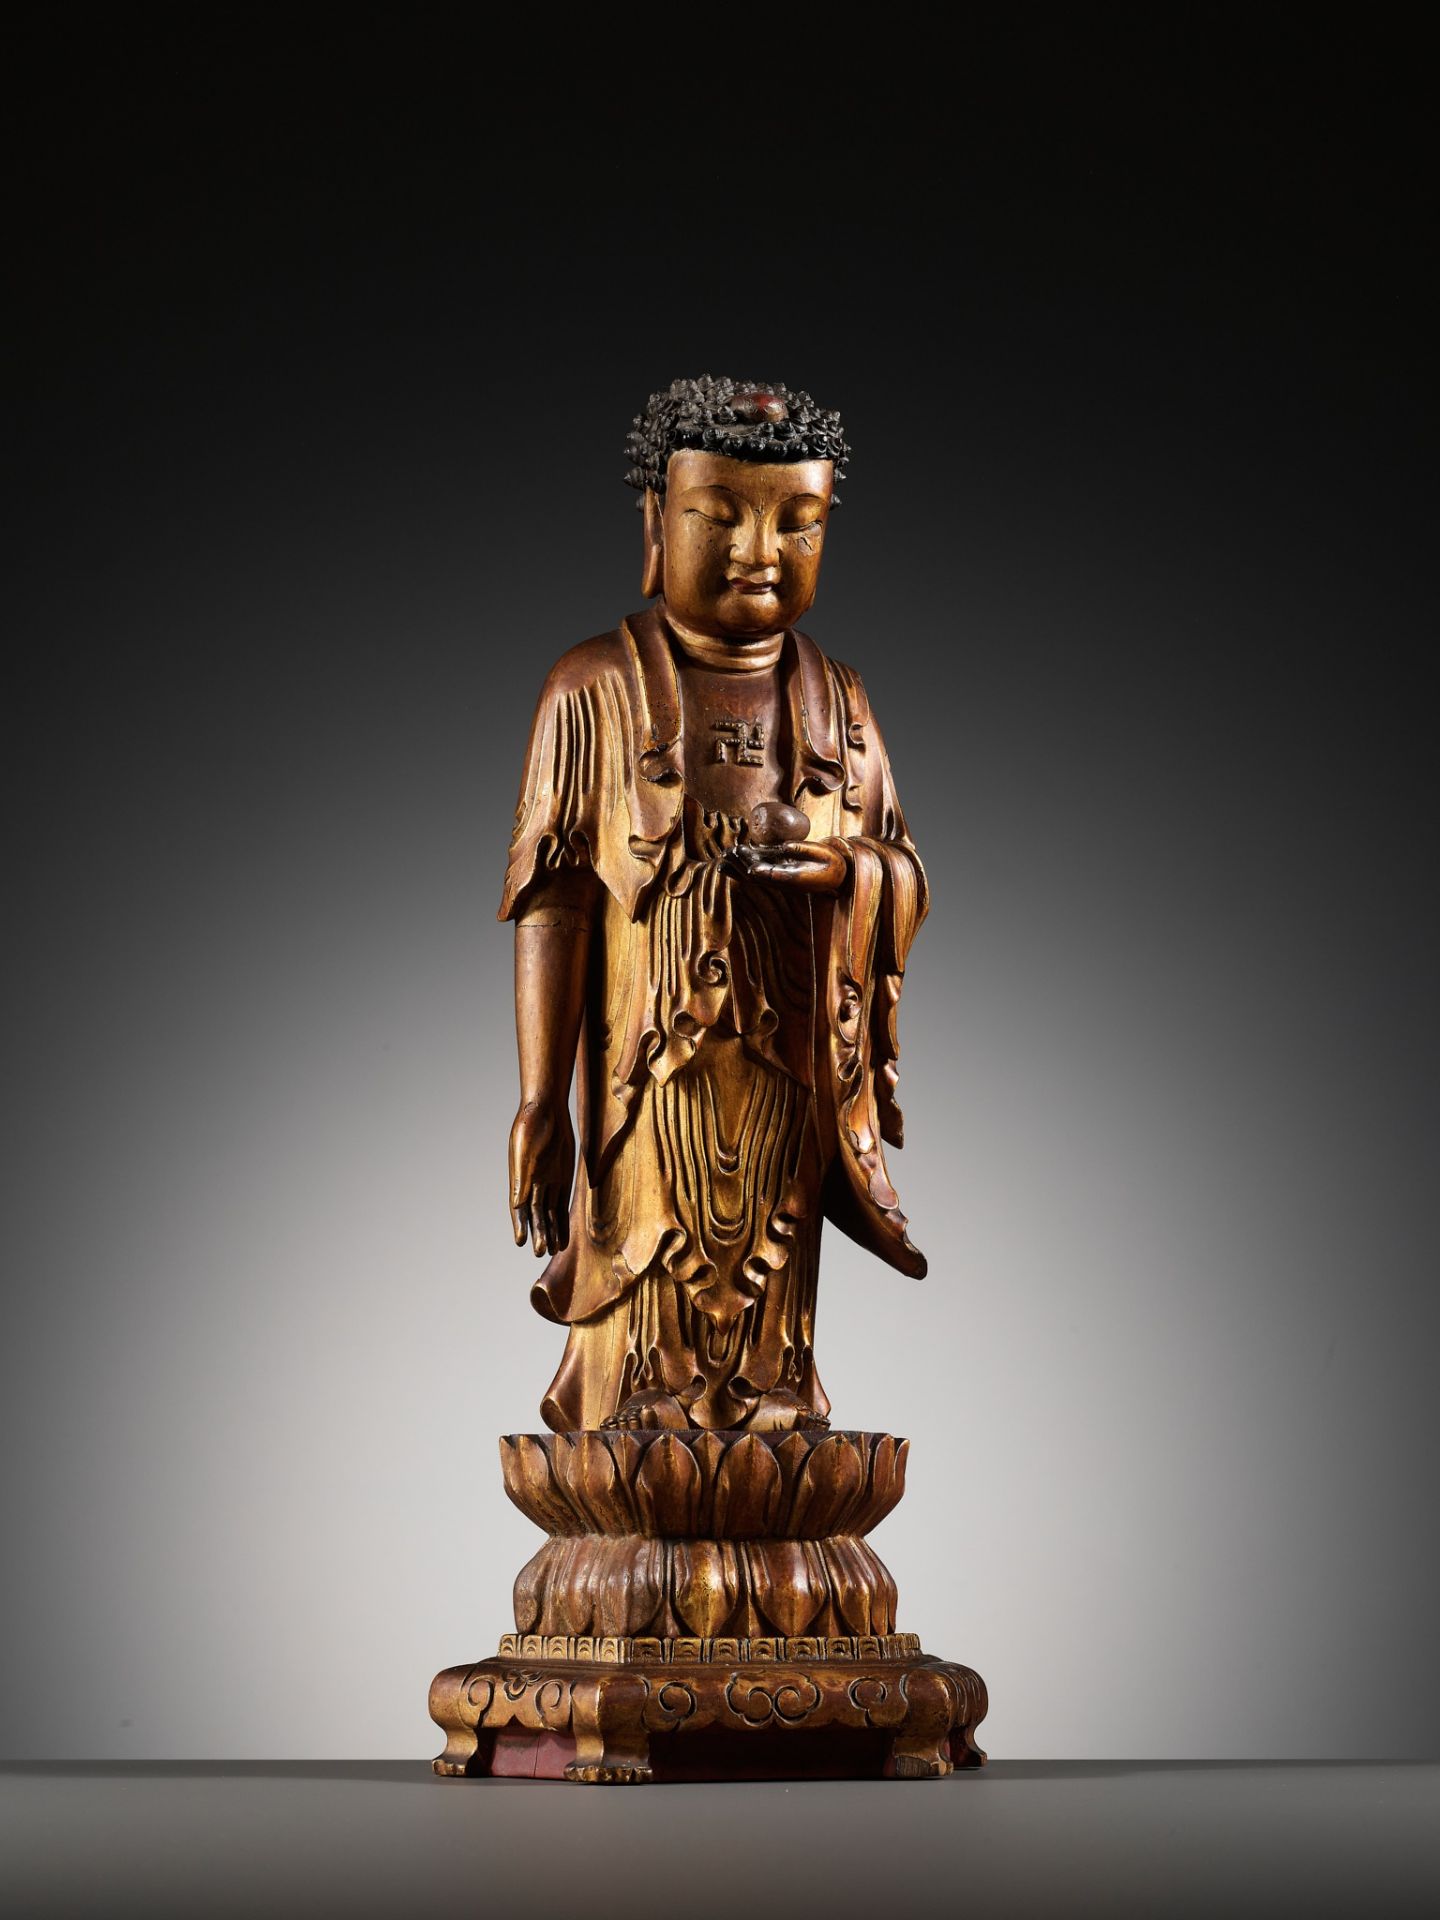 A LACQUER-GILT WOOD FIGURE OF THE STANDING BUDDHA, CHINA, 17TH - 18TH CENTURY - Image 13 of 15